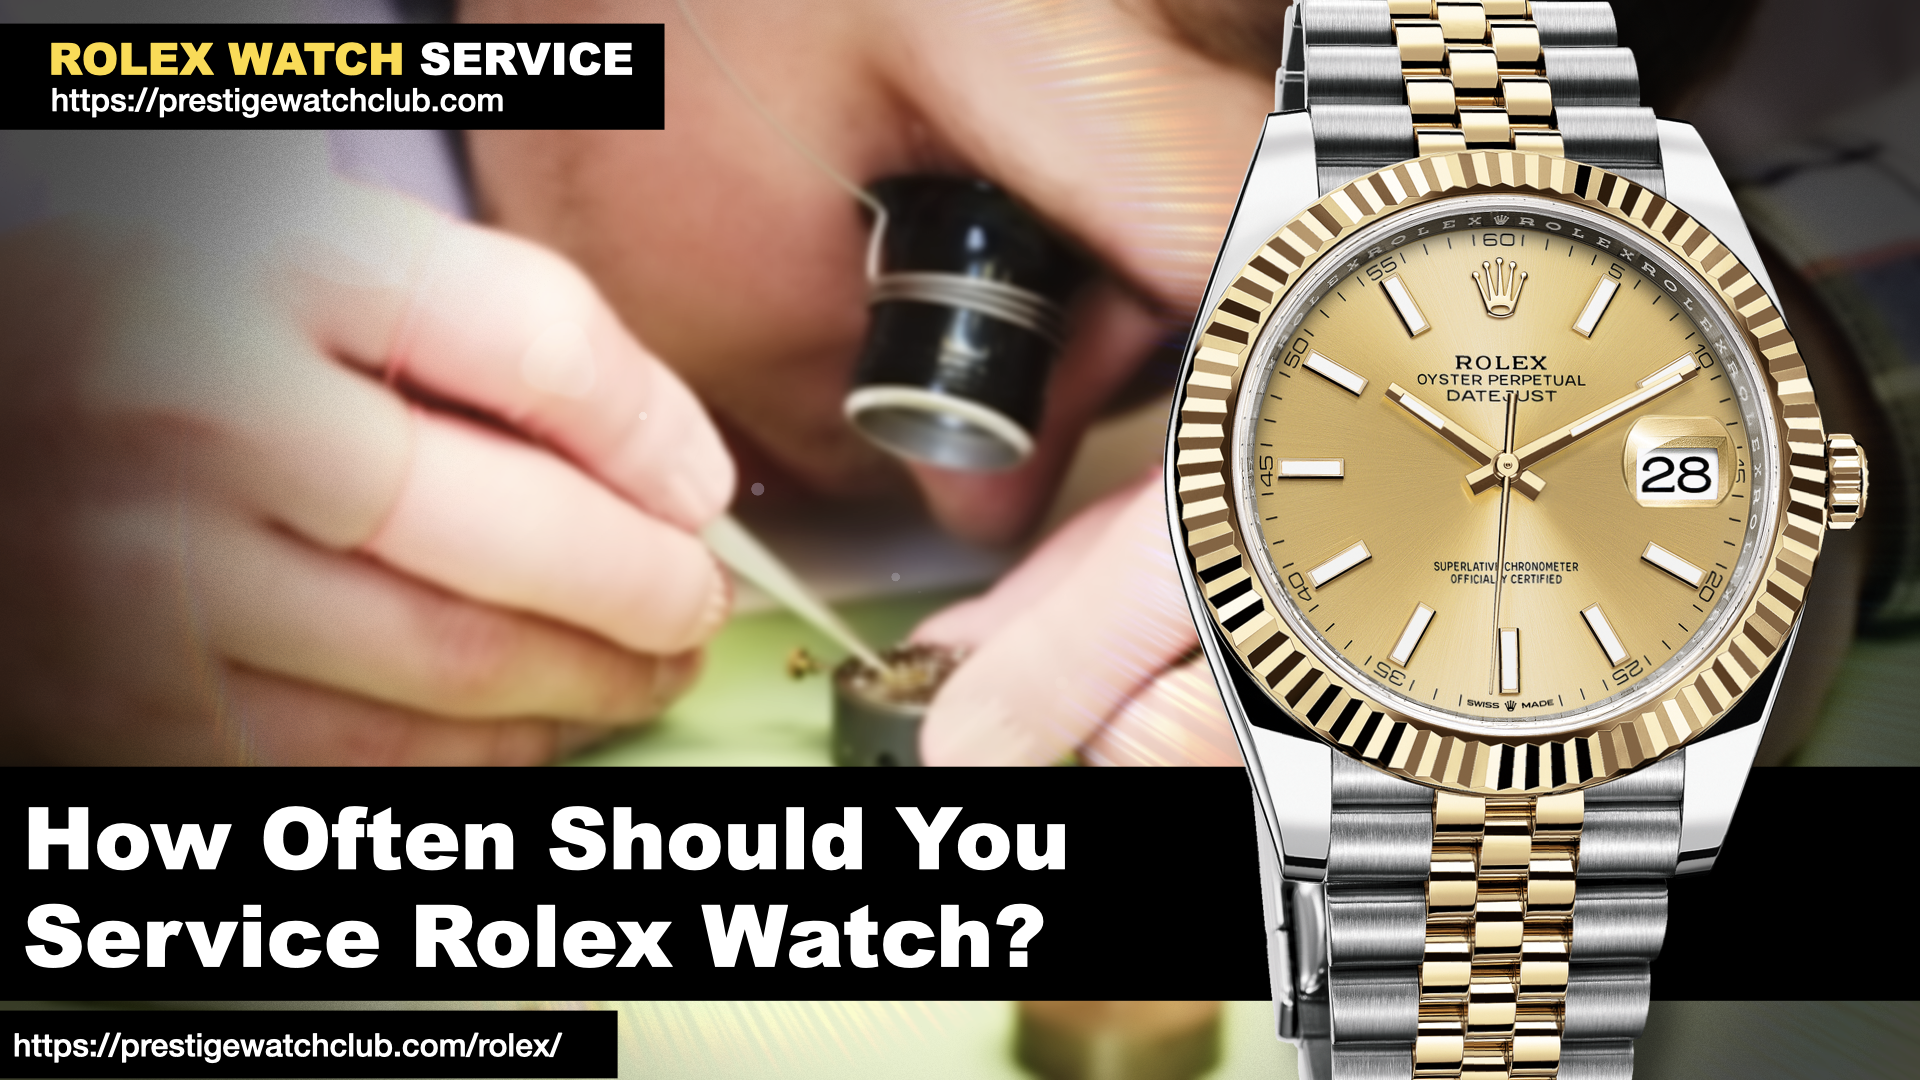 How Often Should You Service Rolex Watch?